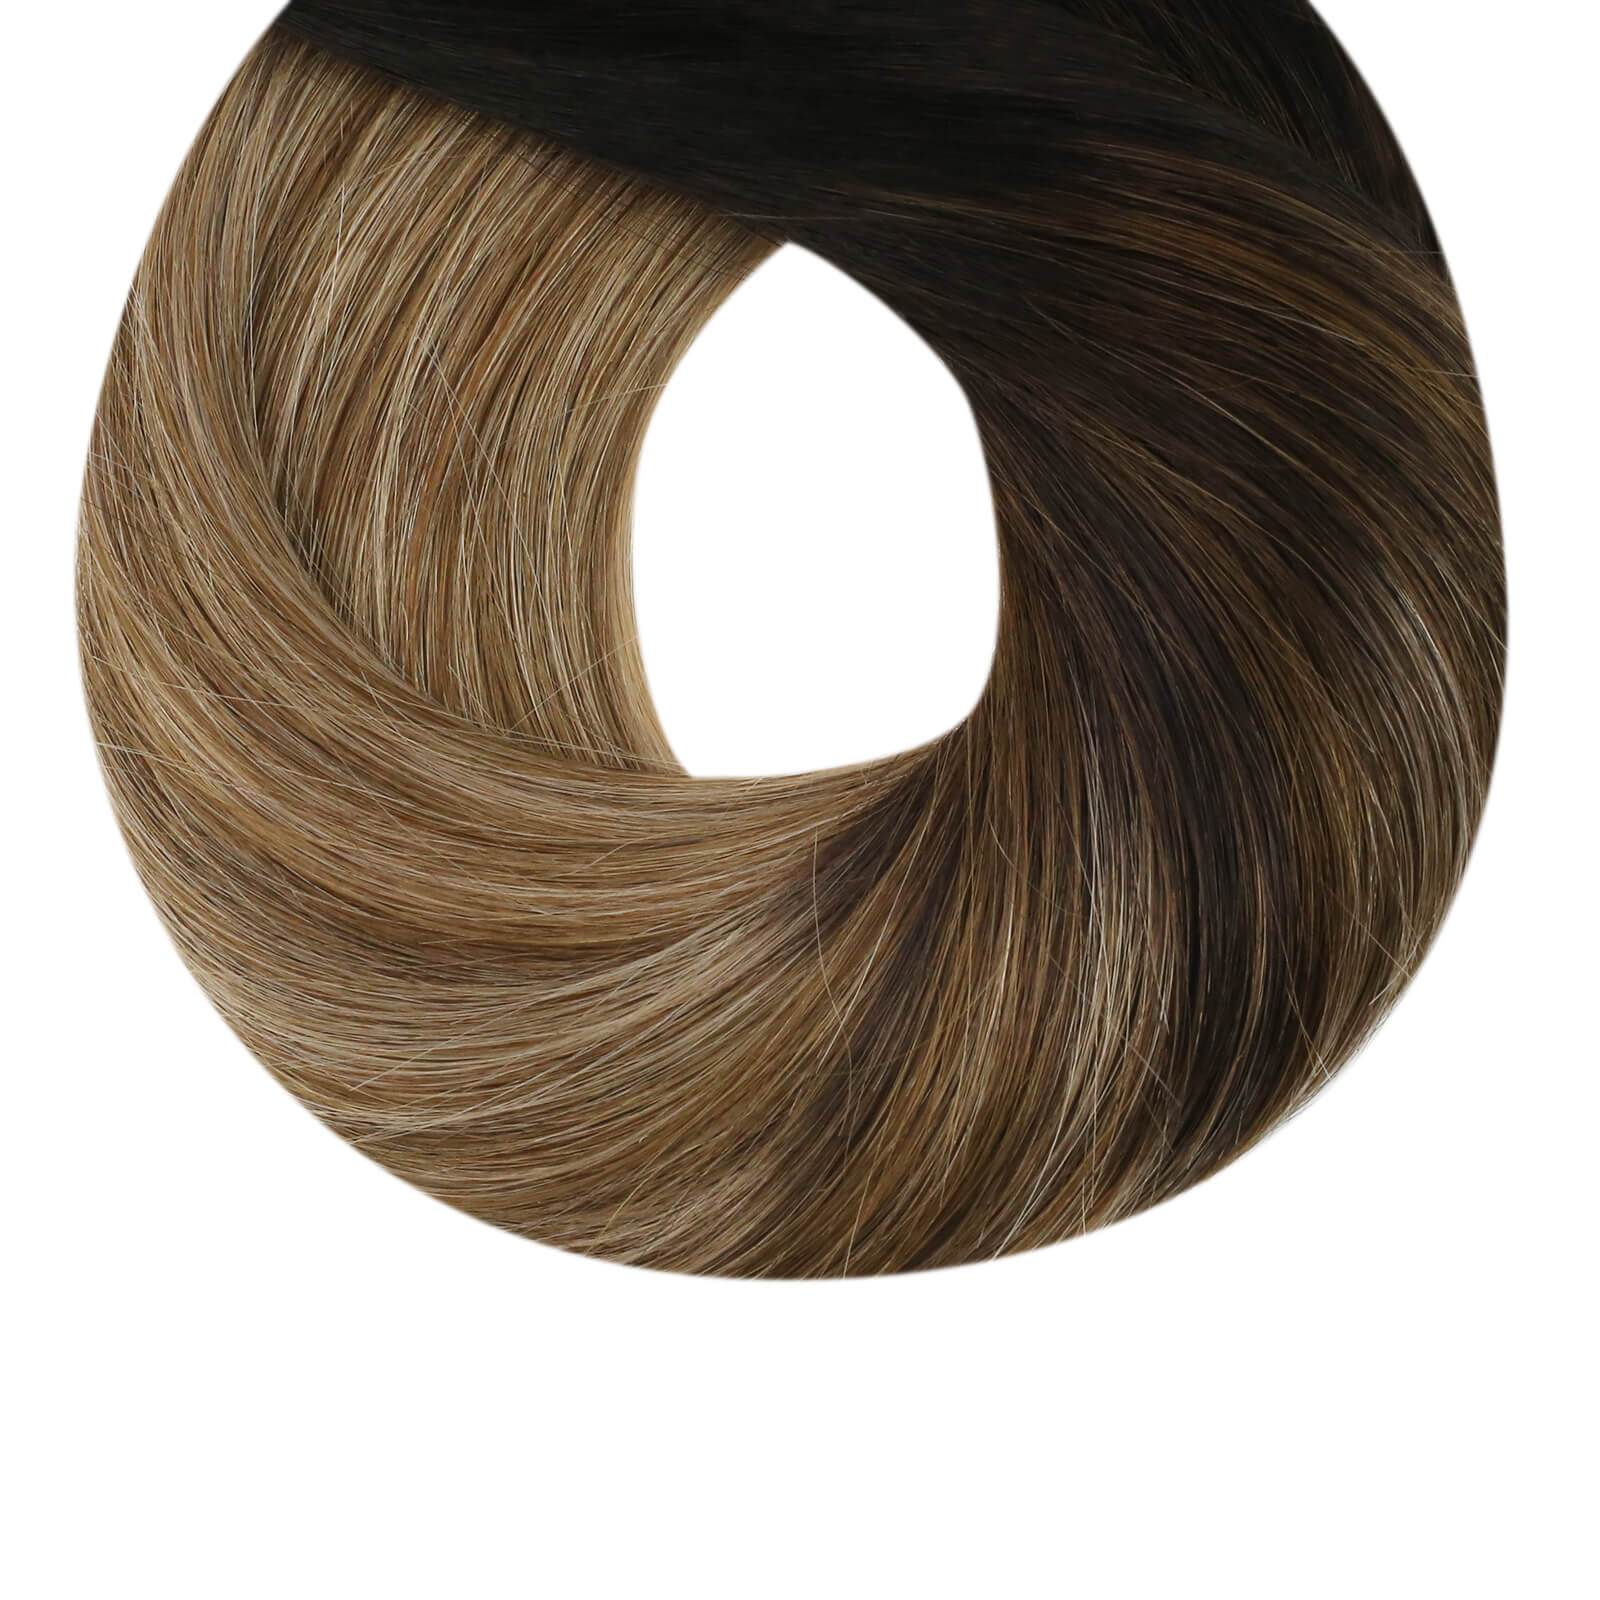 Off Black to Medium Brown with Blonde Straight Hair Extensions Clip Human Hair